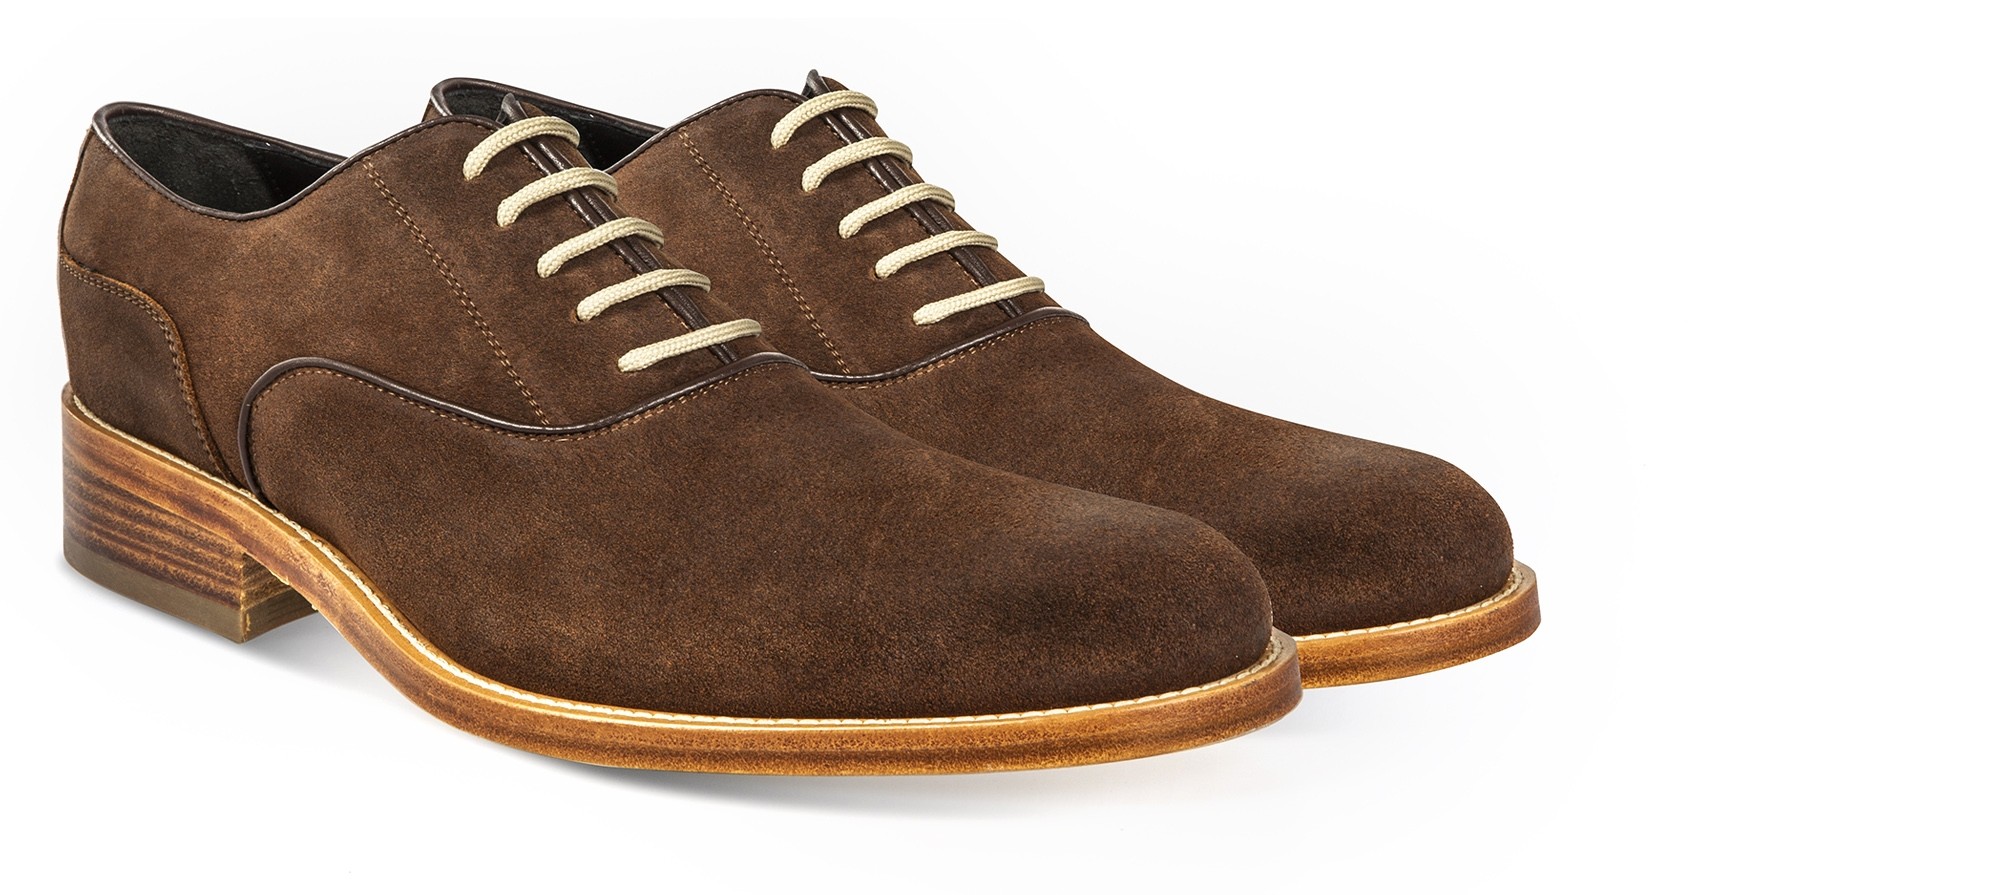 Carrara - Elevator Shoes in Suede Leather from 2.4 to 3.1 inches